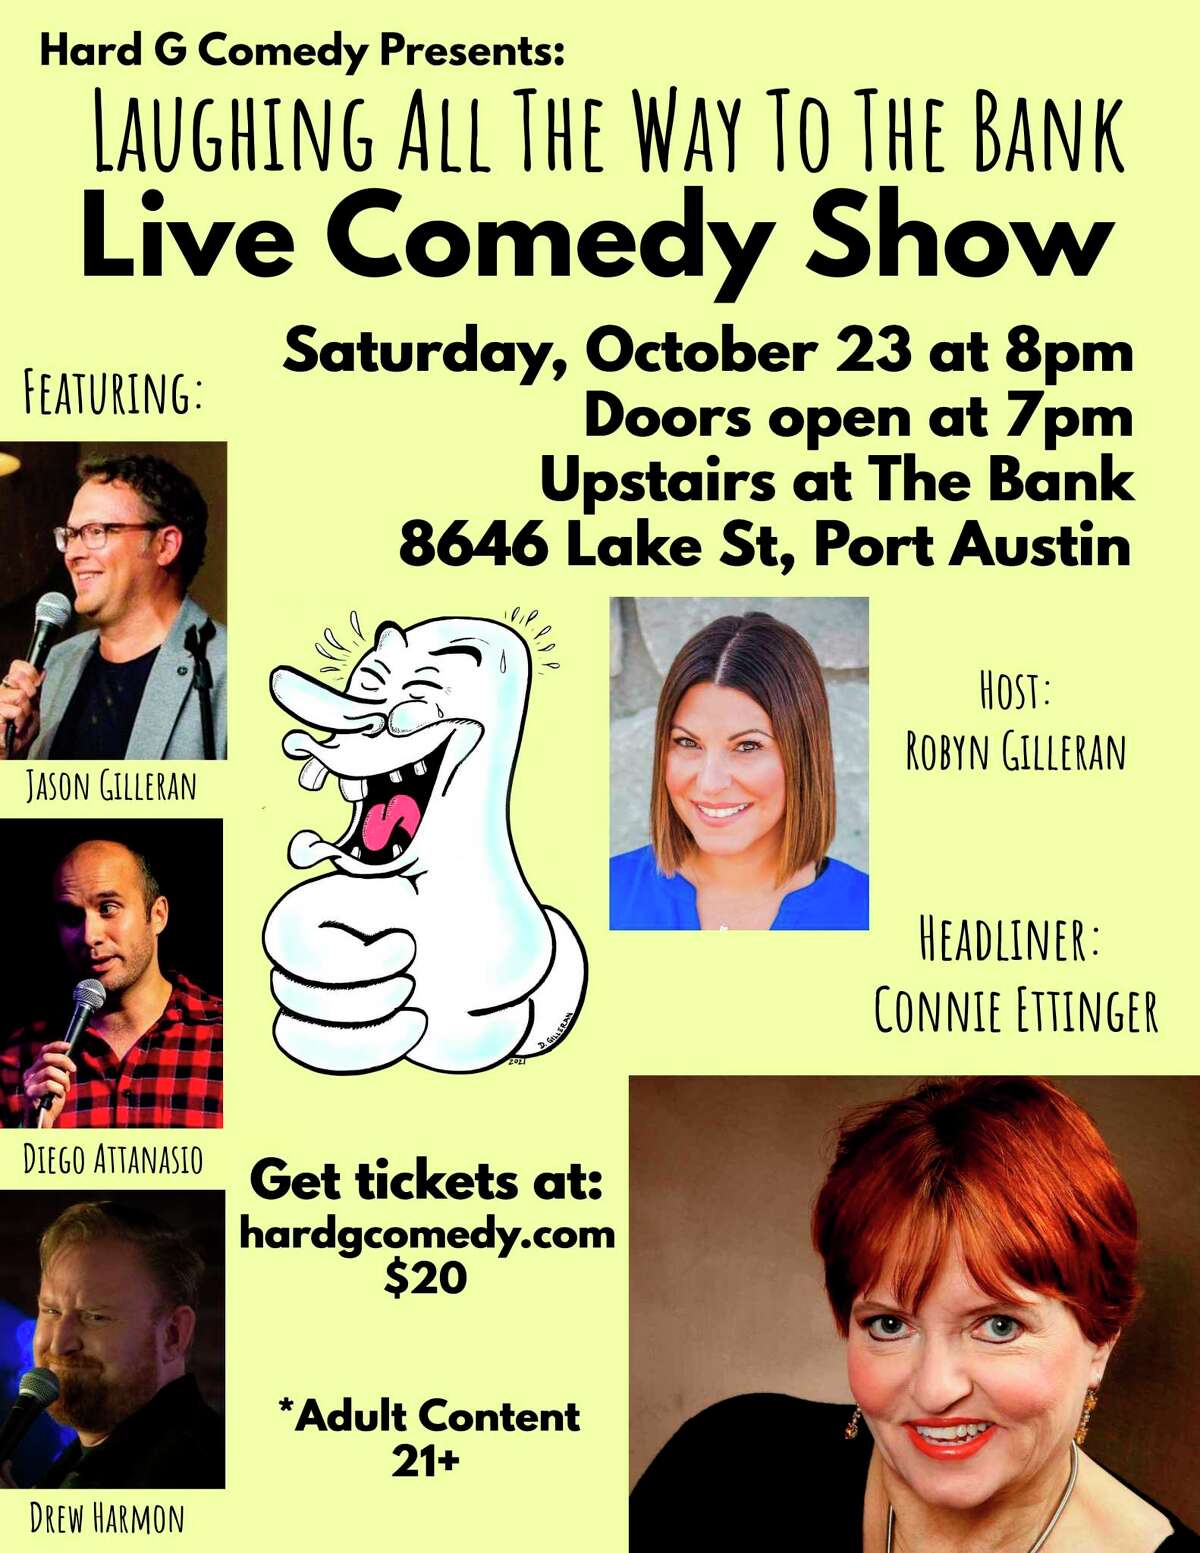 Hard G Comedy will be performing at The Bank 1884 in Port Austin on Oct. 23. Another show is planned for Caseville on Nov. 20, with details still being worked out. (Courtesy Photo)